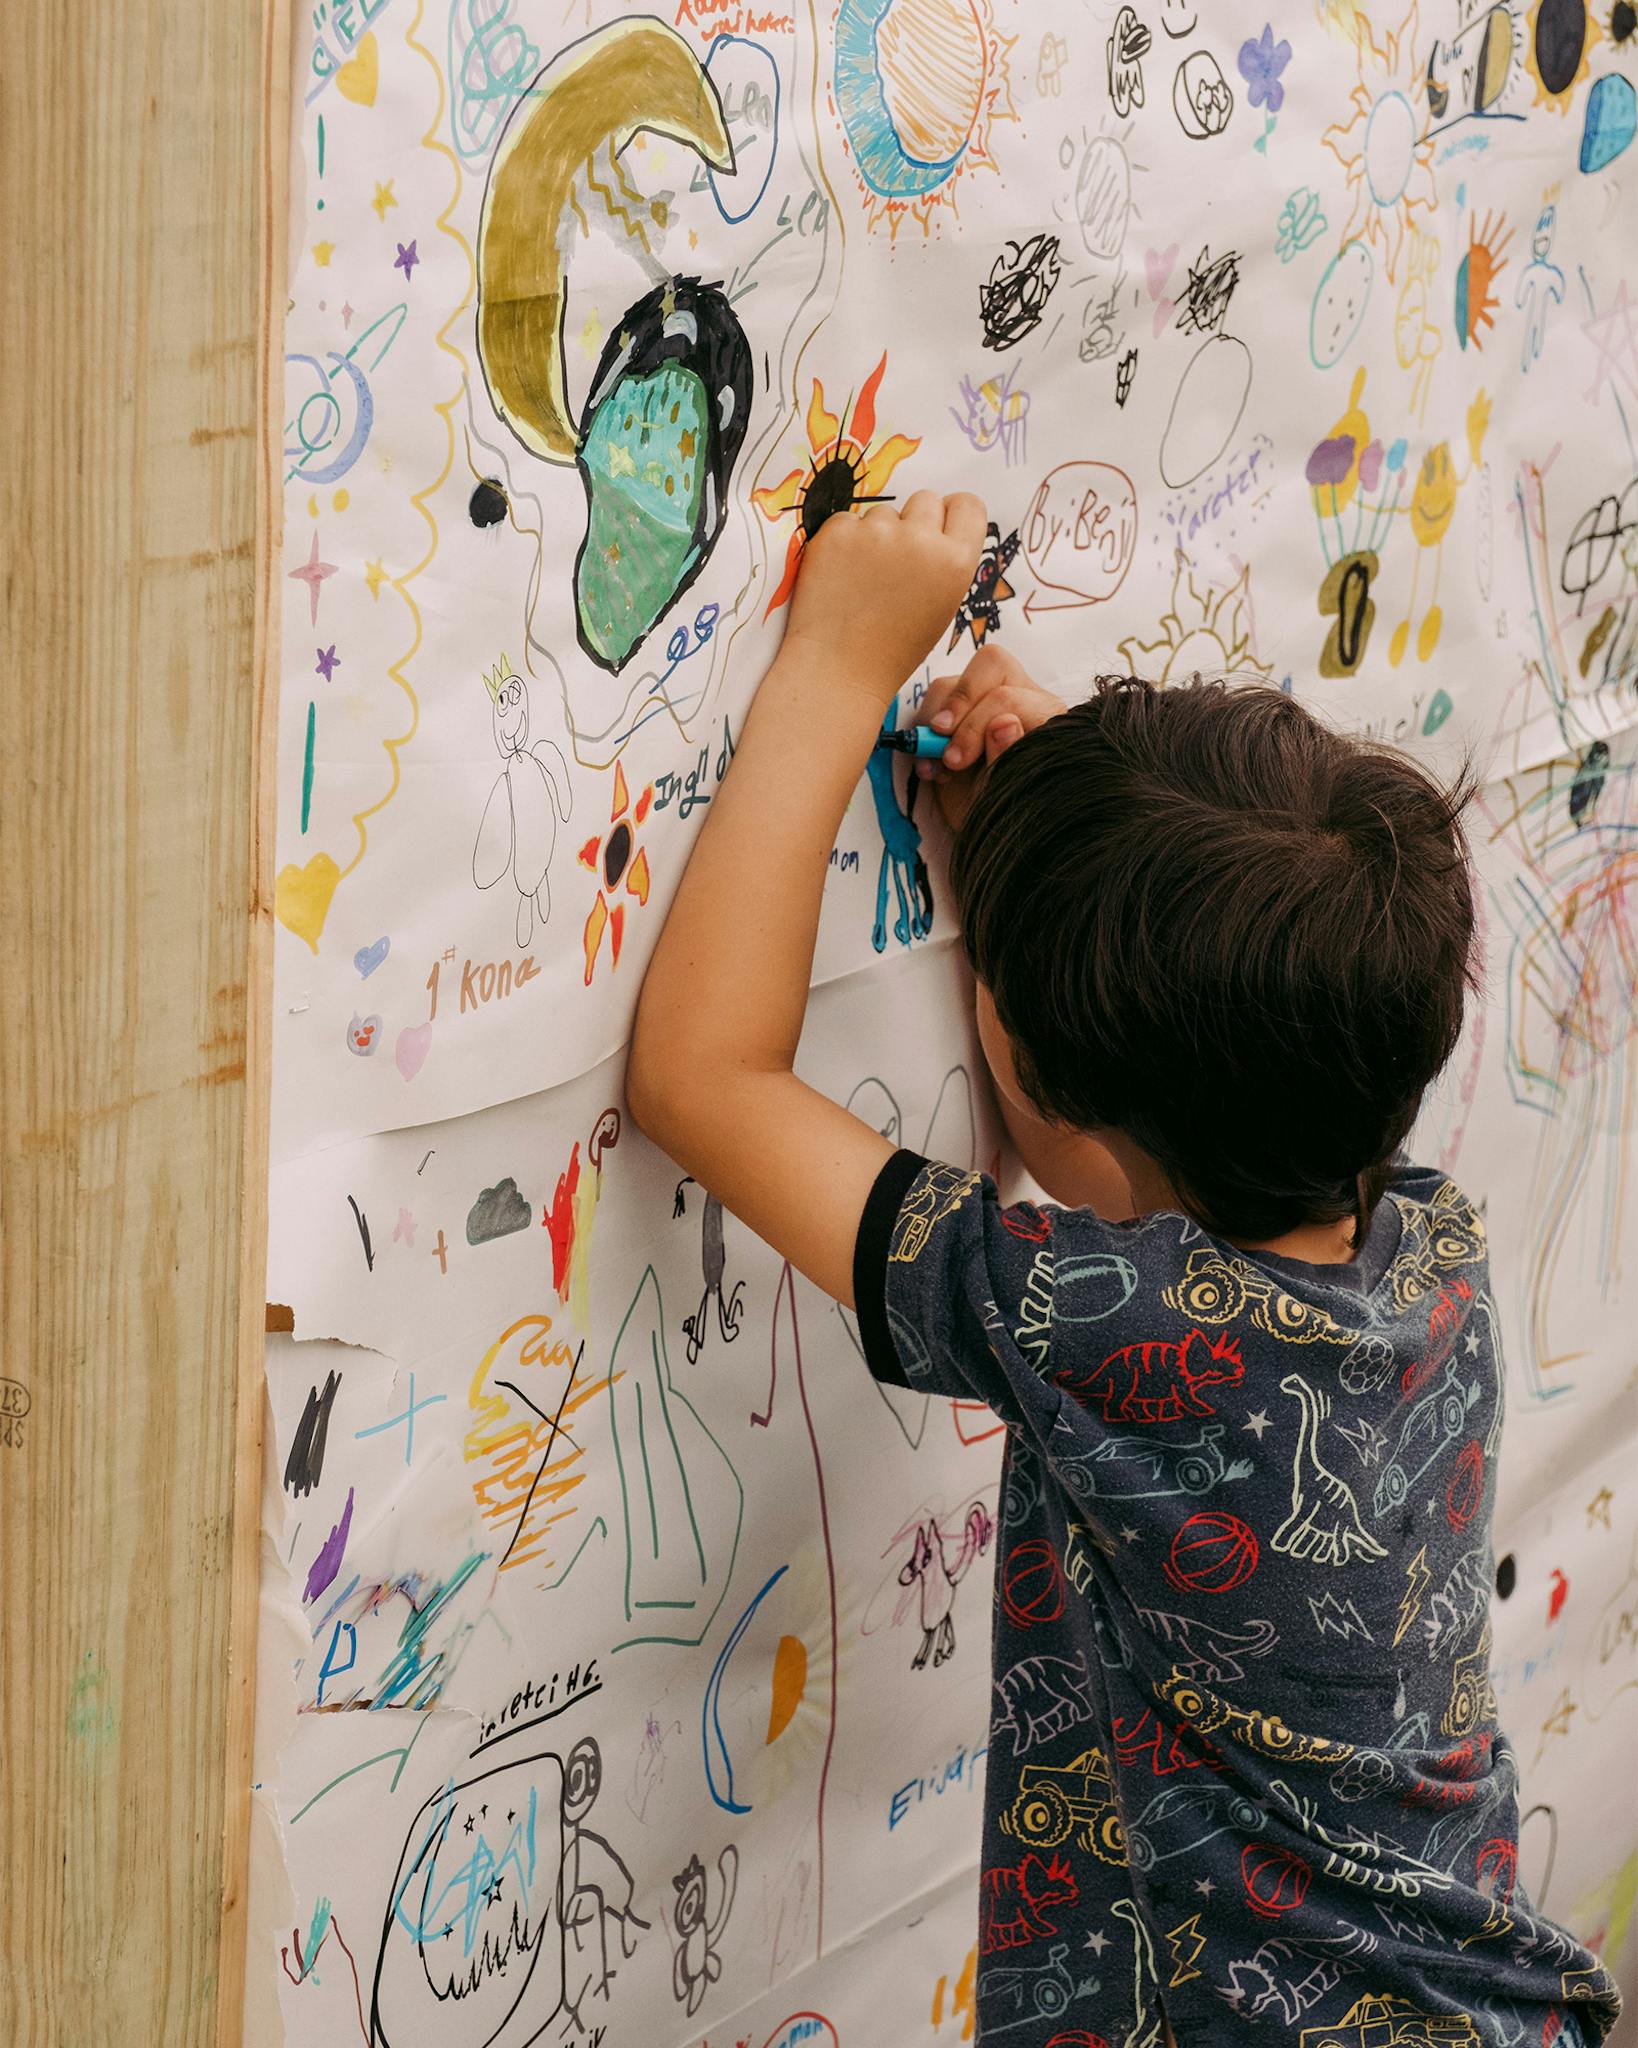 A child contributes his artwork to the community mural wall.